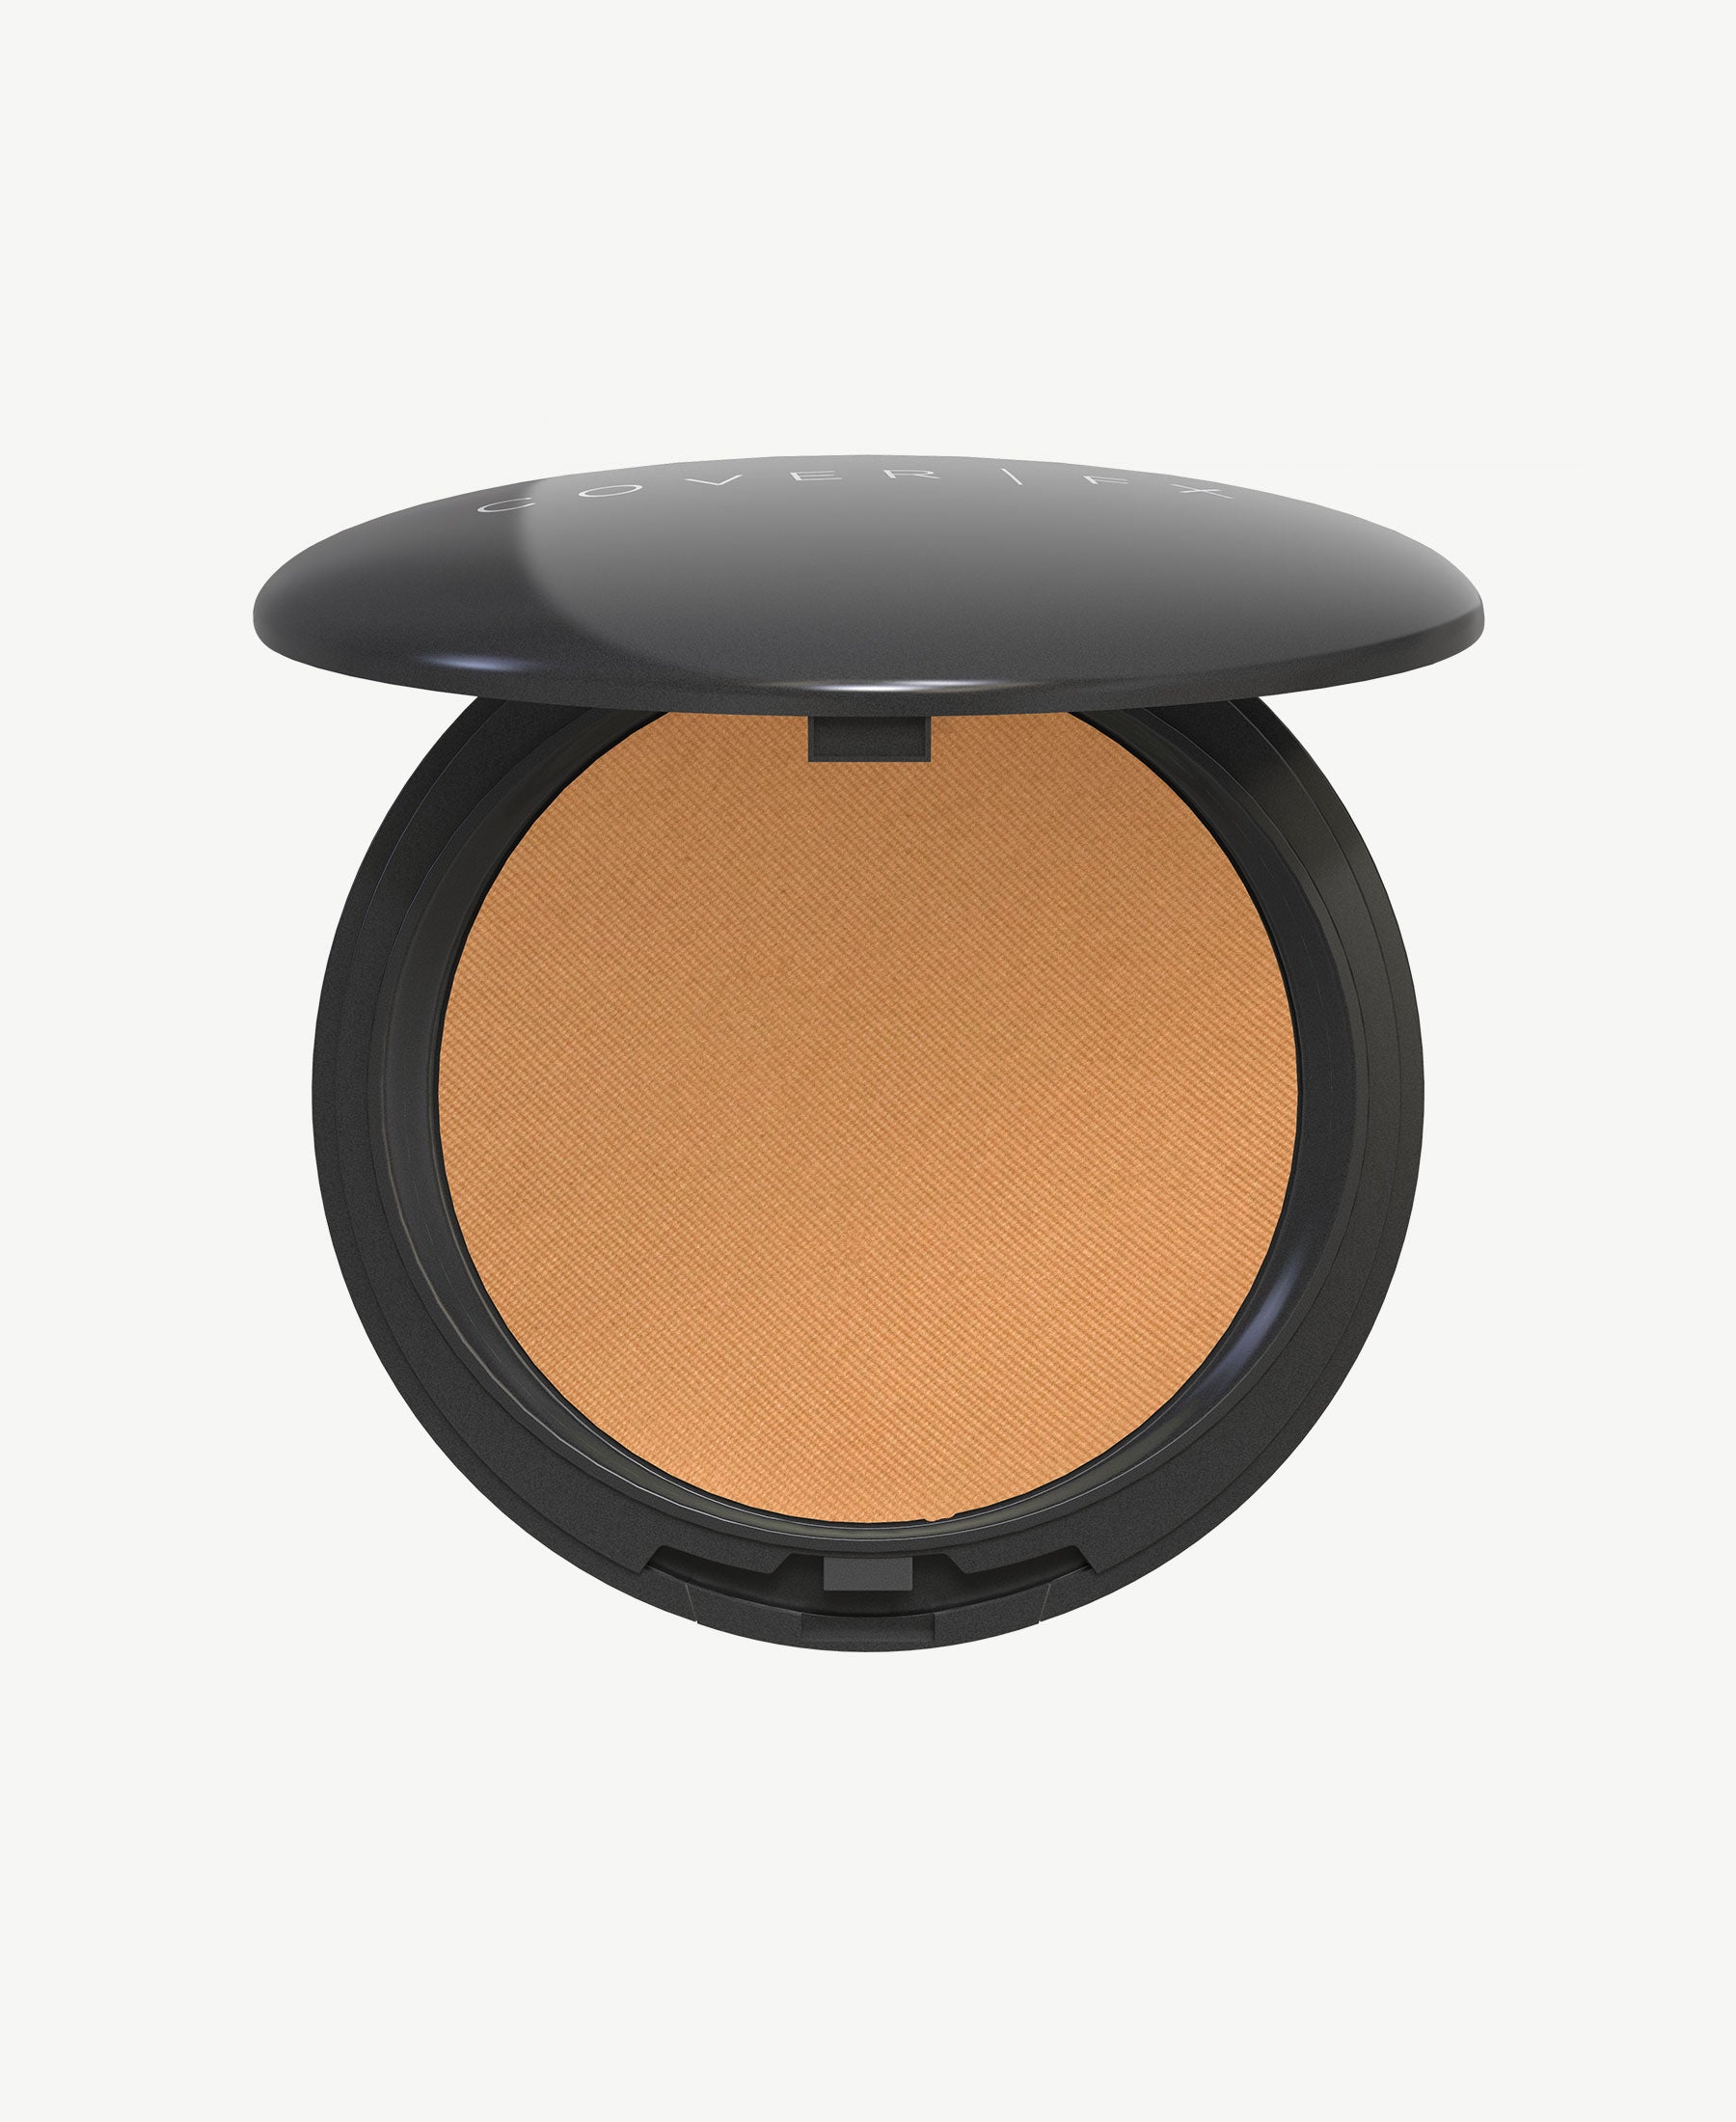 COVER FX Pressed Mineral Foundation 